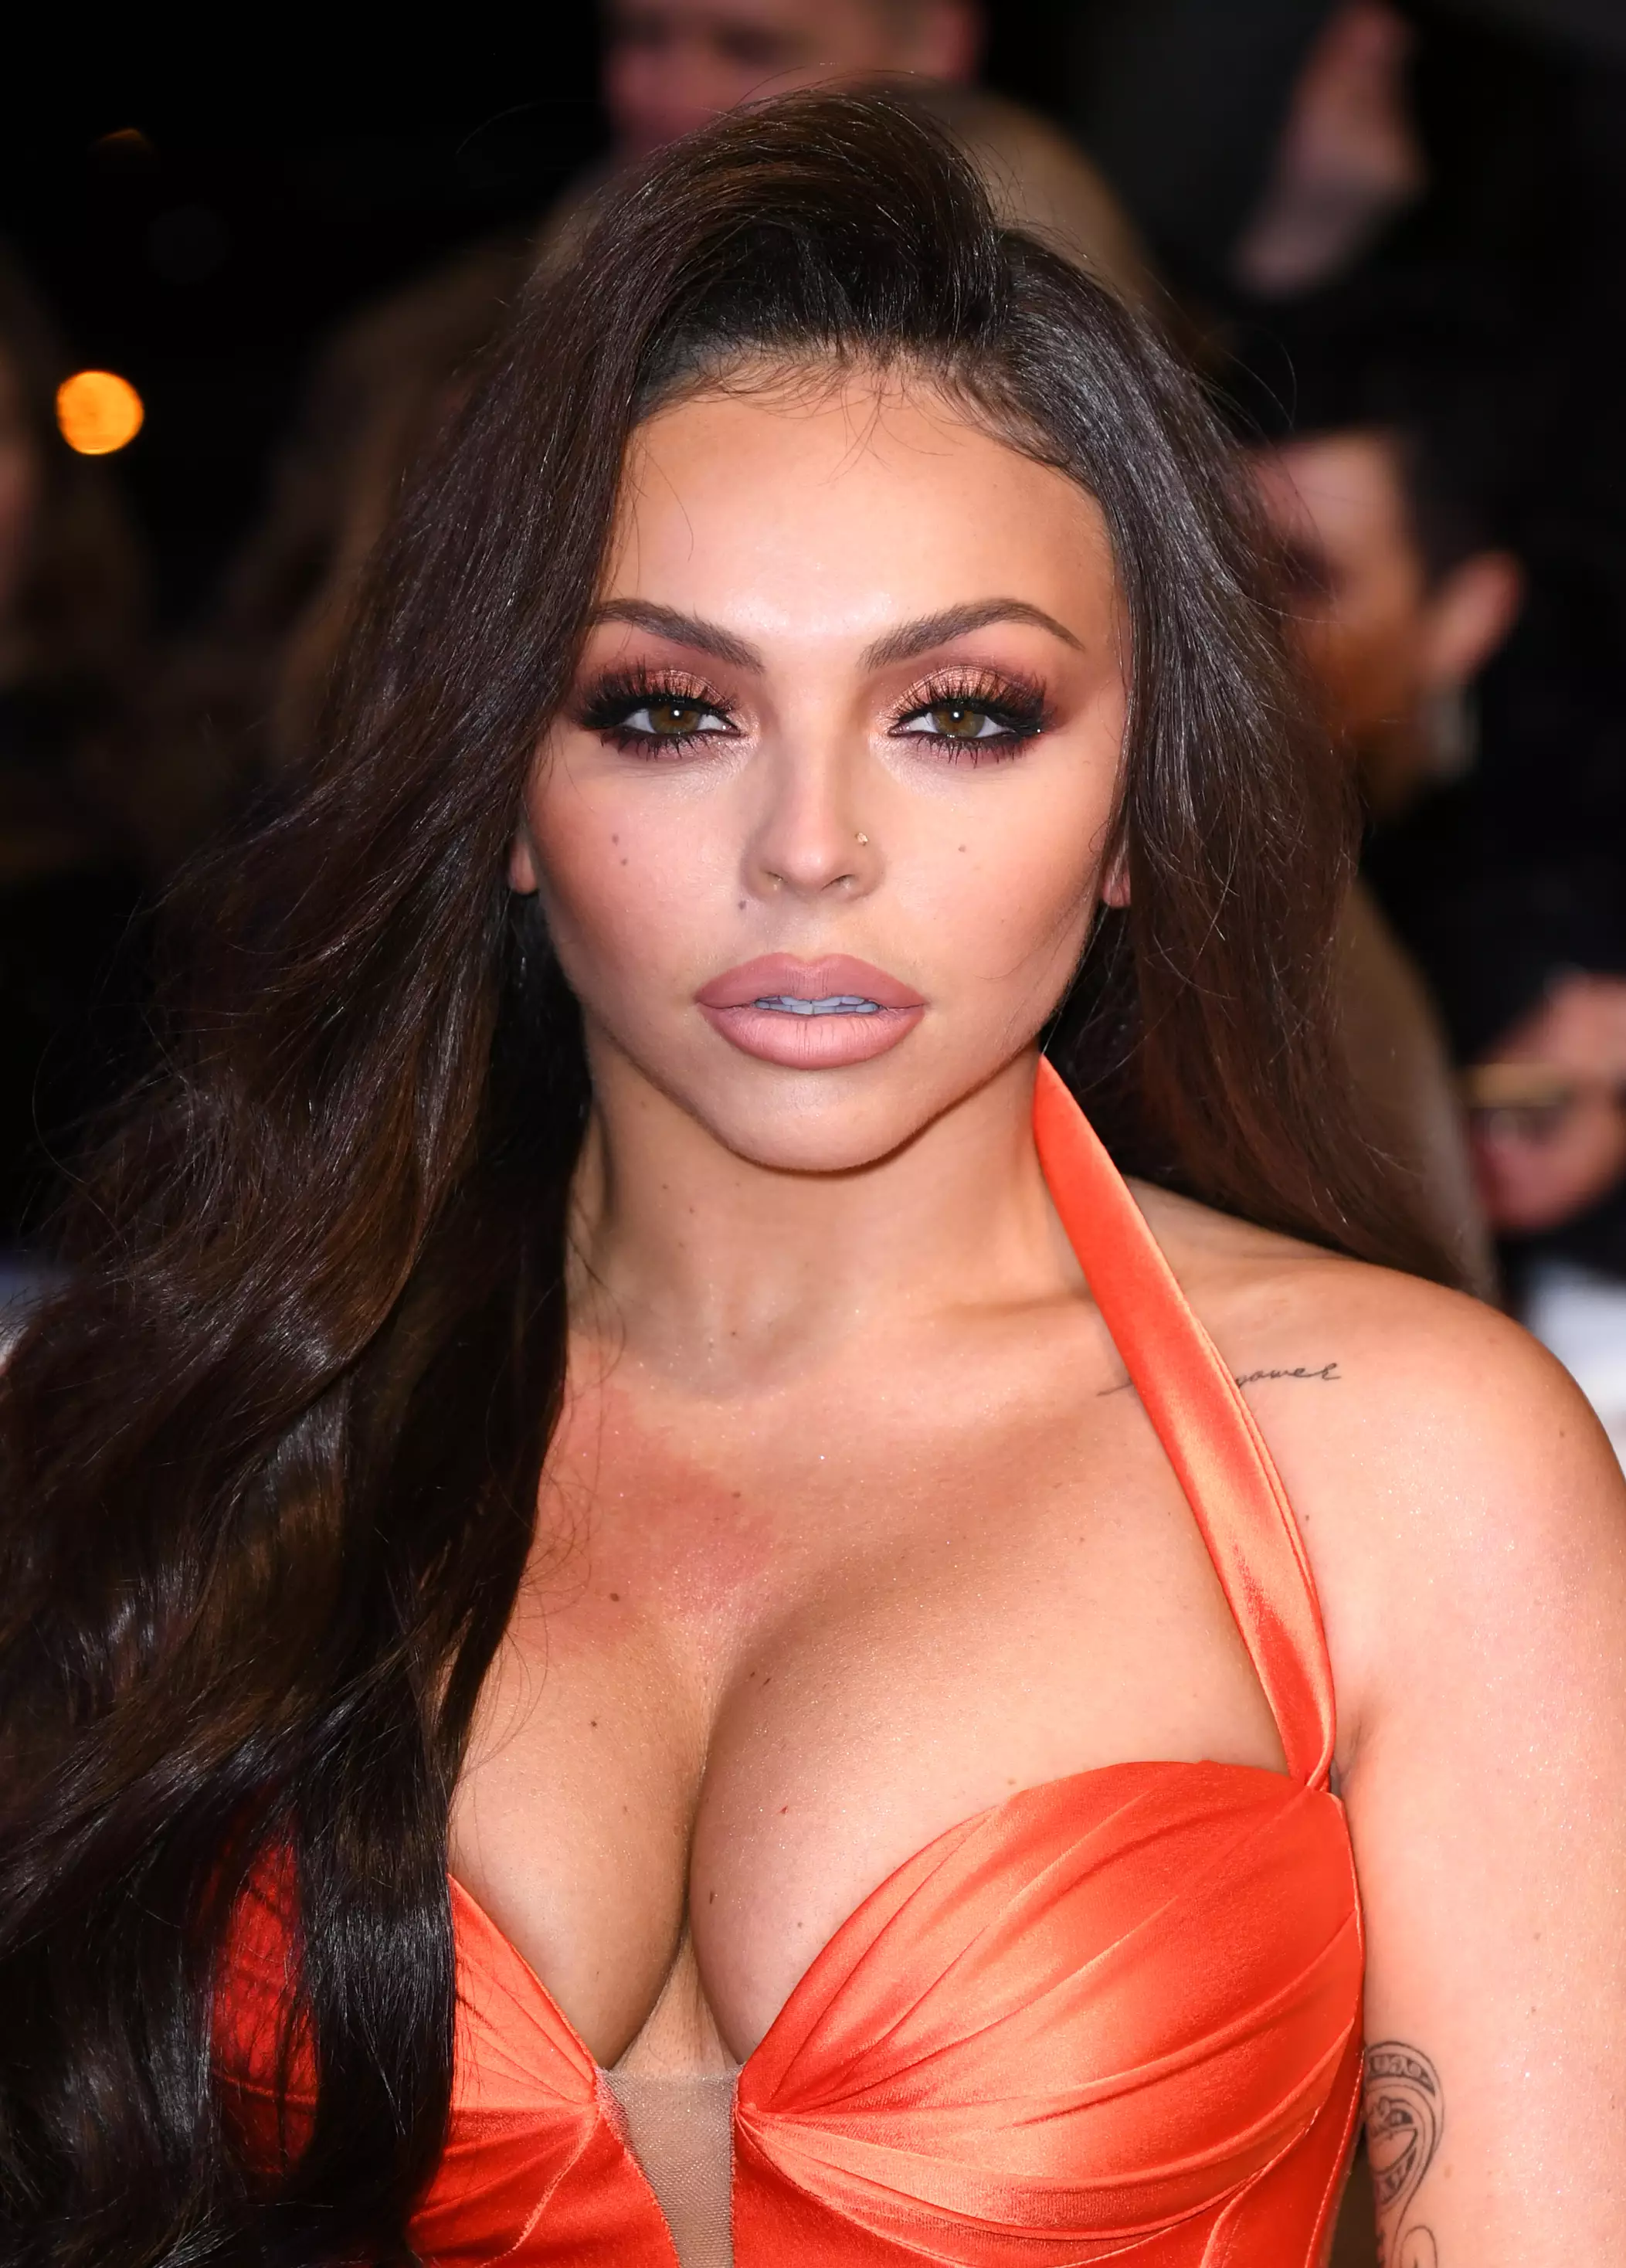 On Monday evening, Jesy announced she would be leaving Little Mix (